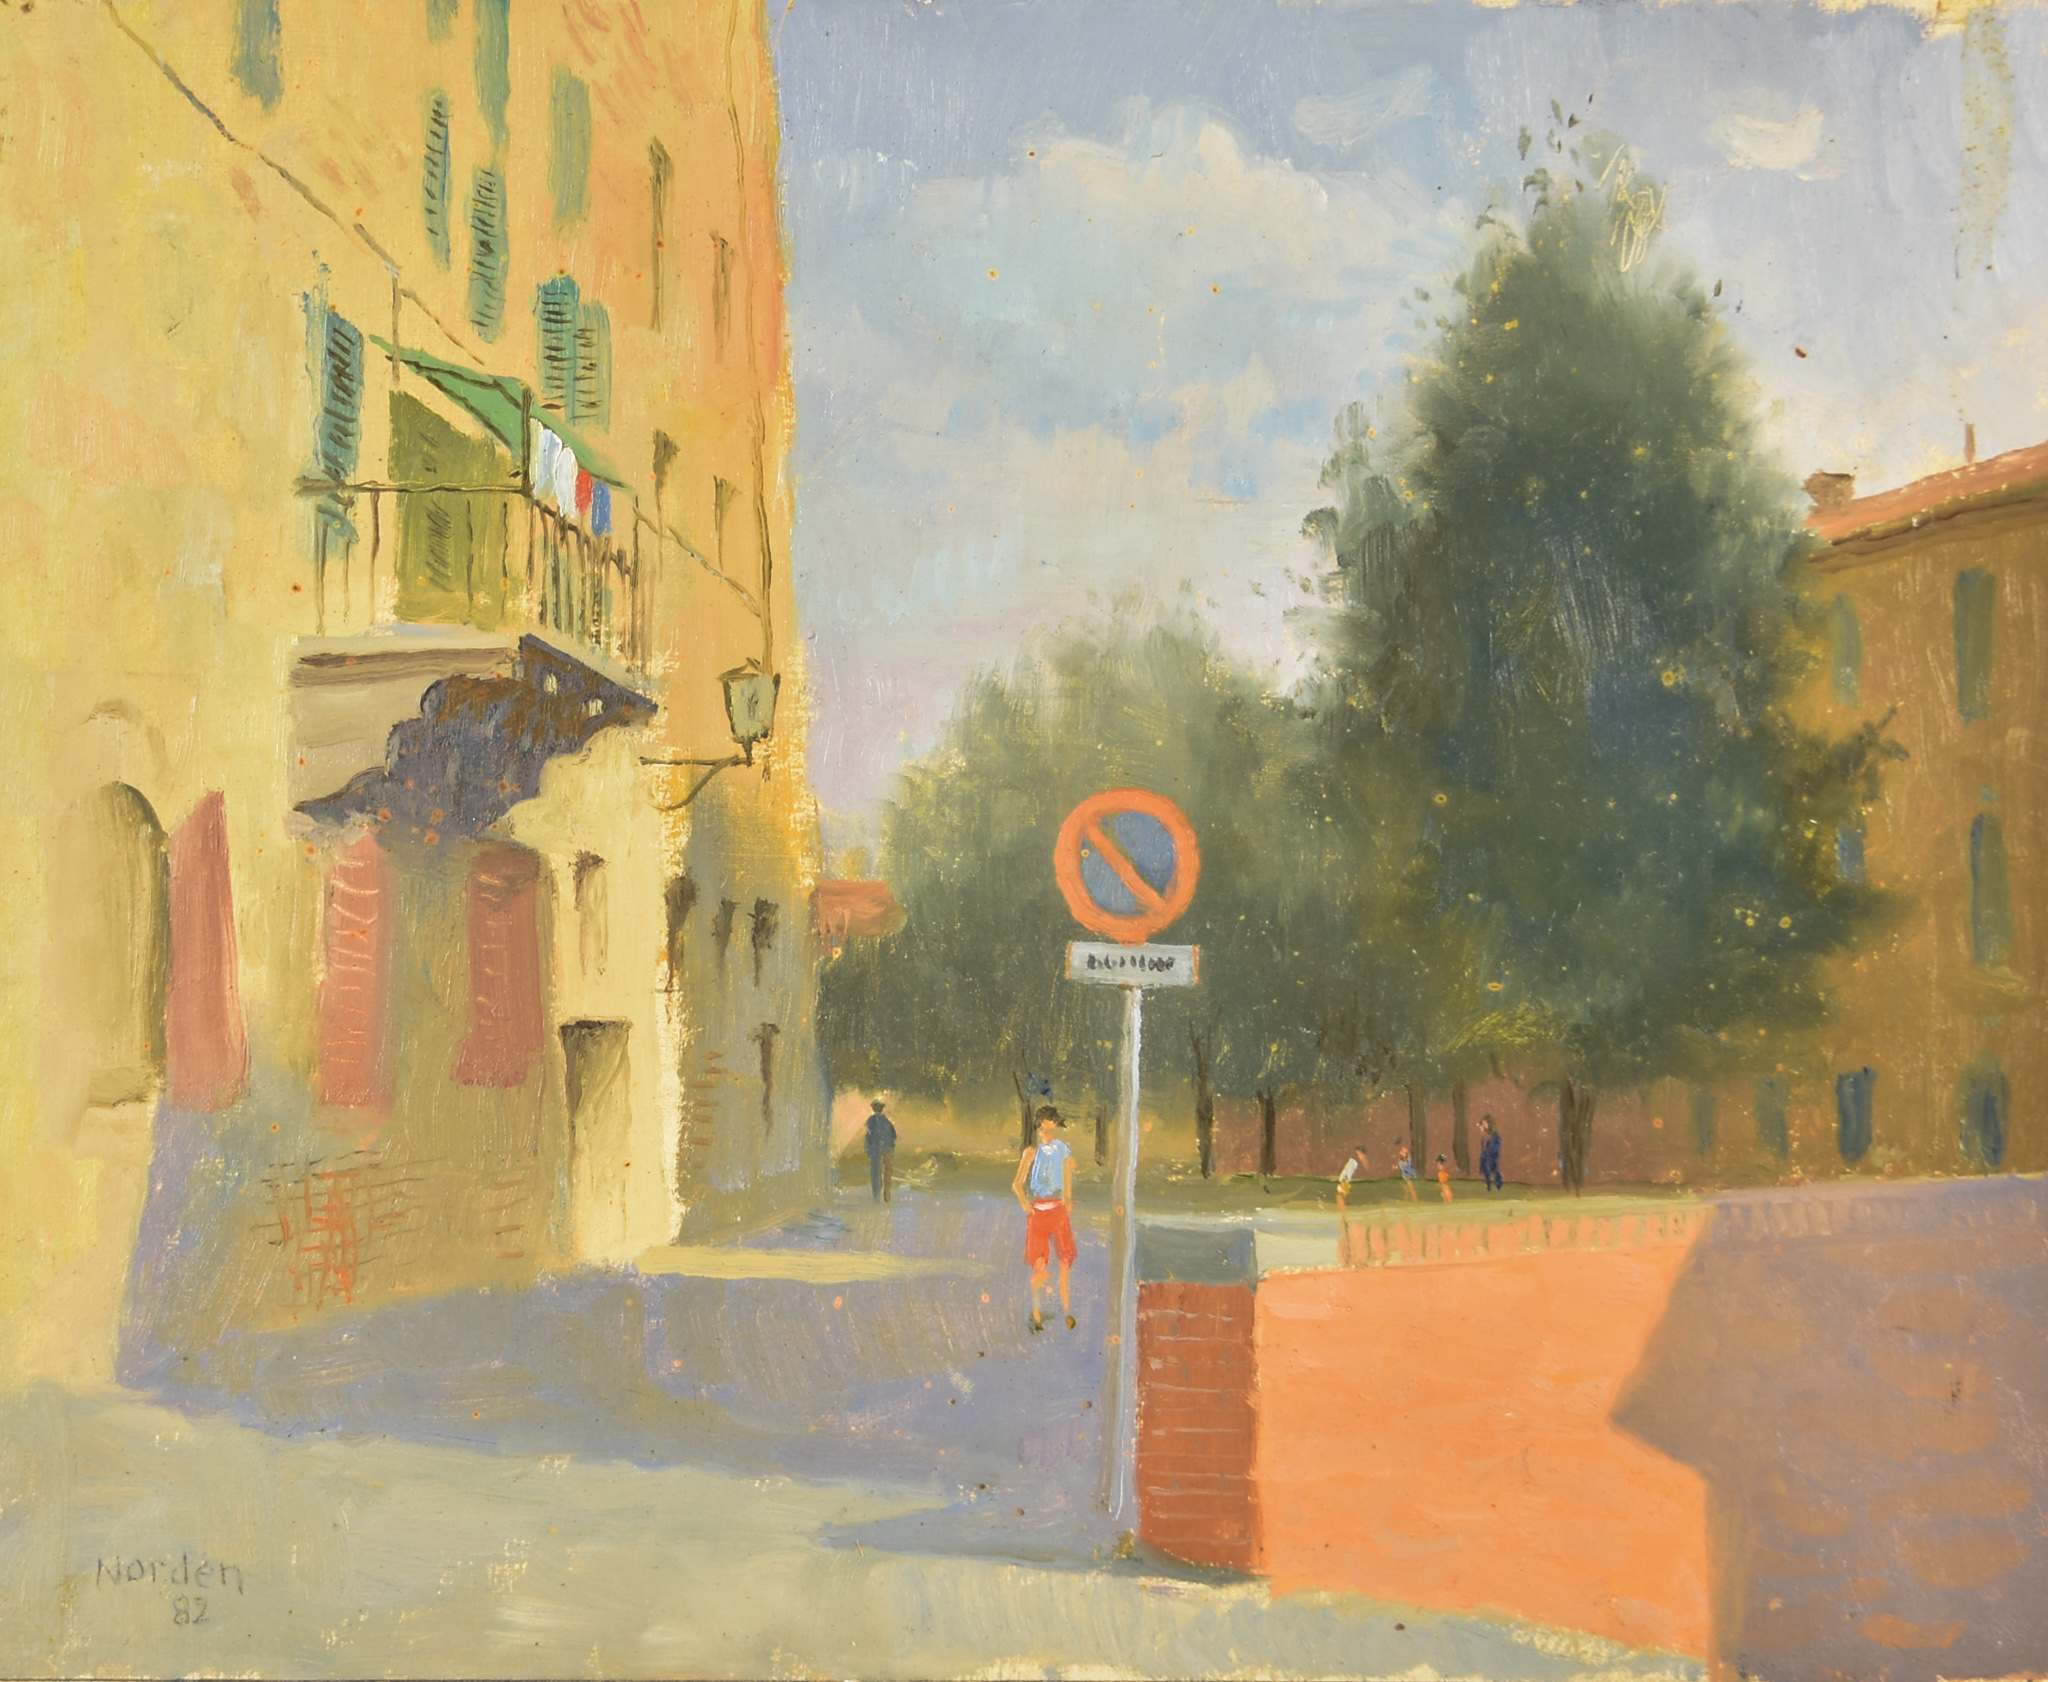 Gerald Norden (1912-2000) - Two oil paintings - Italian street scenes - "Siena" and another with